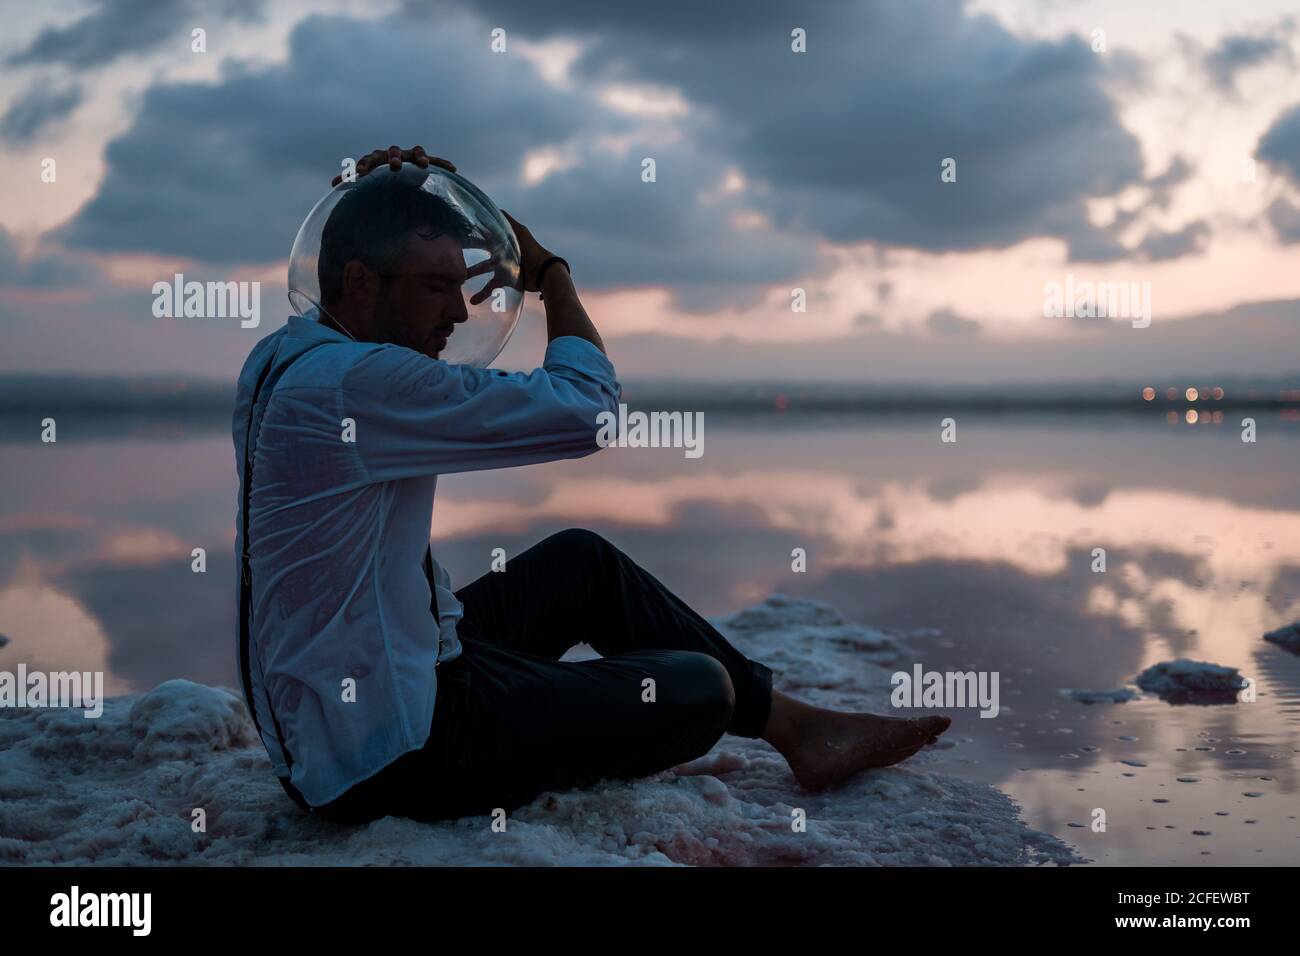 Pensive man with closed eyes in wet shirt taking out empty aquarium on head while sitting still by the seaside in twilight Stock Photo